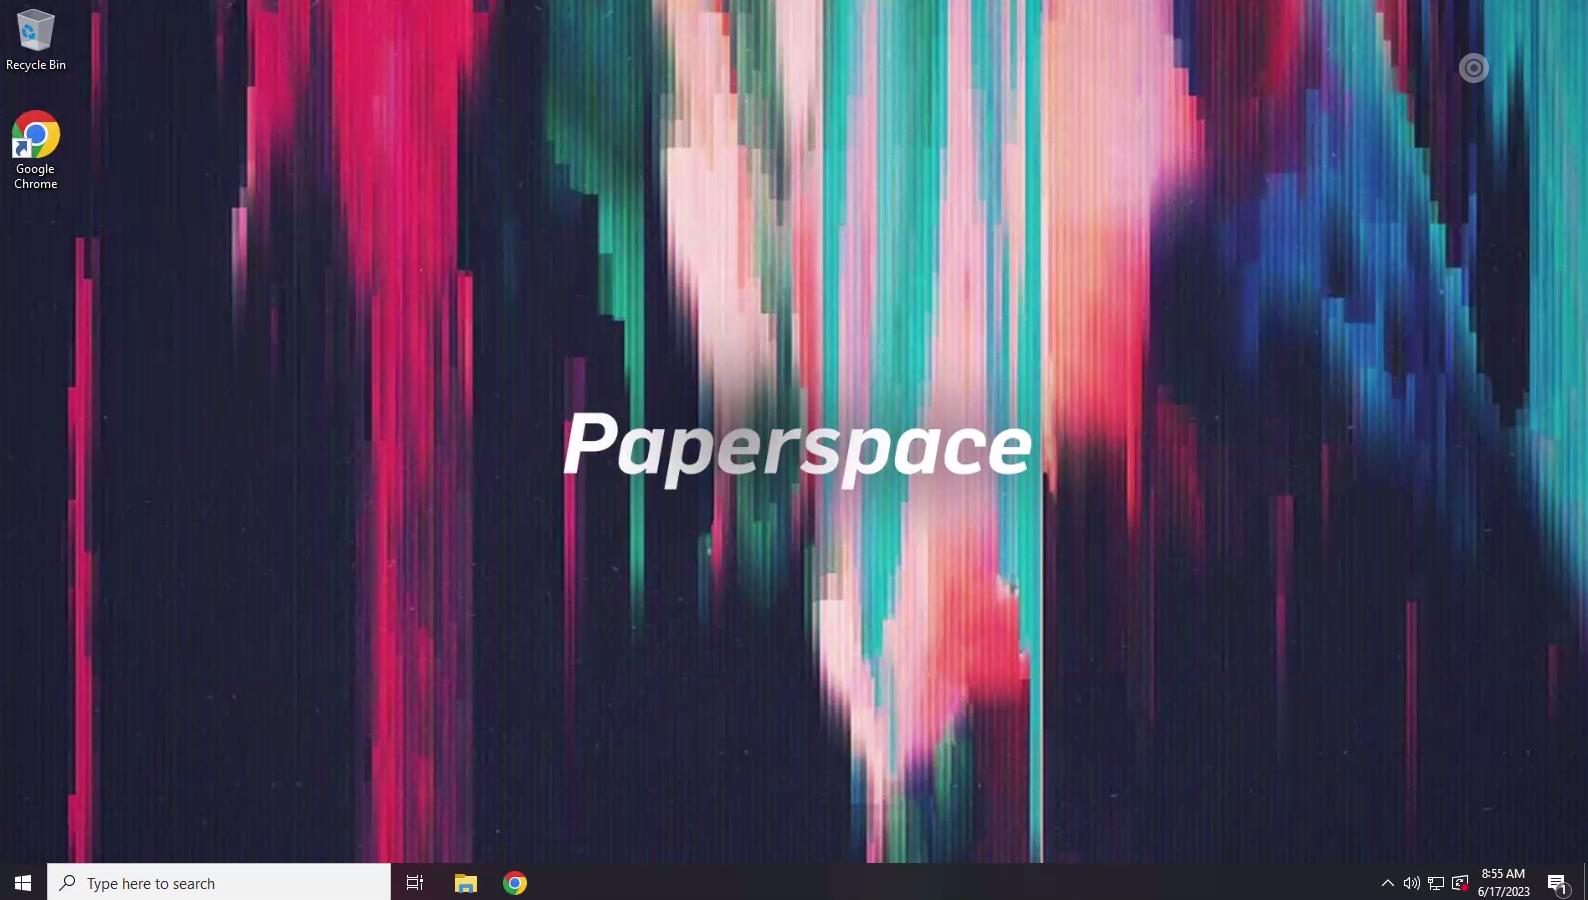 zuccie.com Paperspaceの日本語化を始める